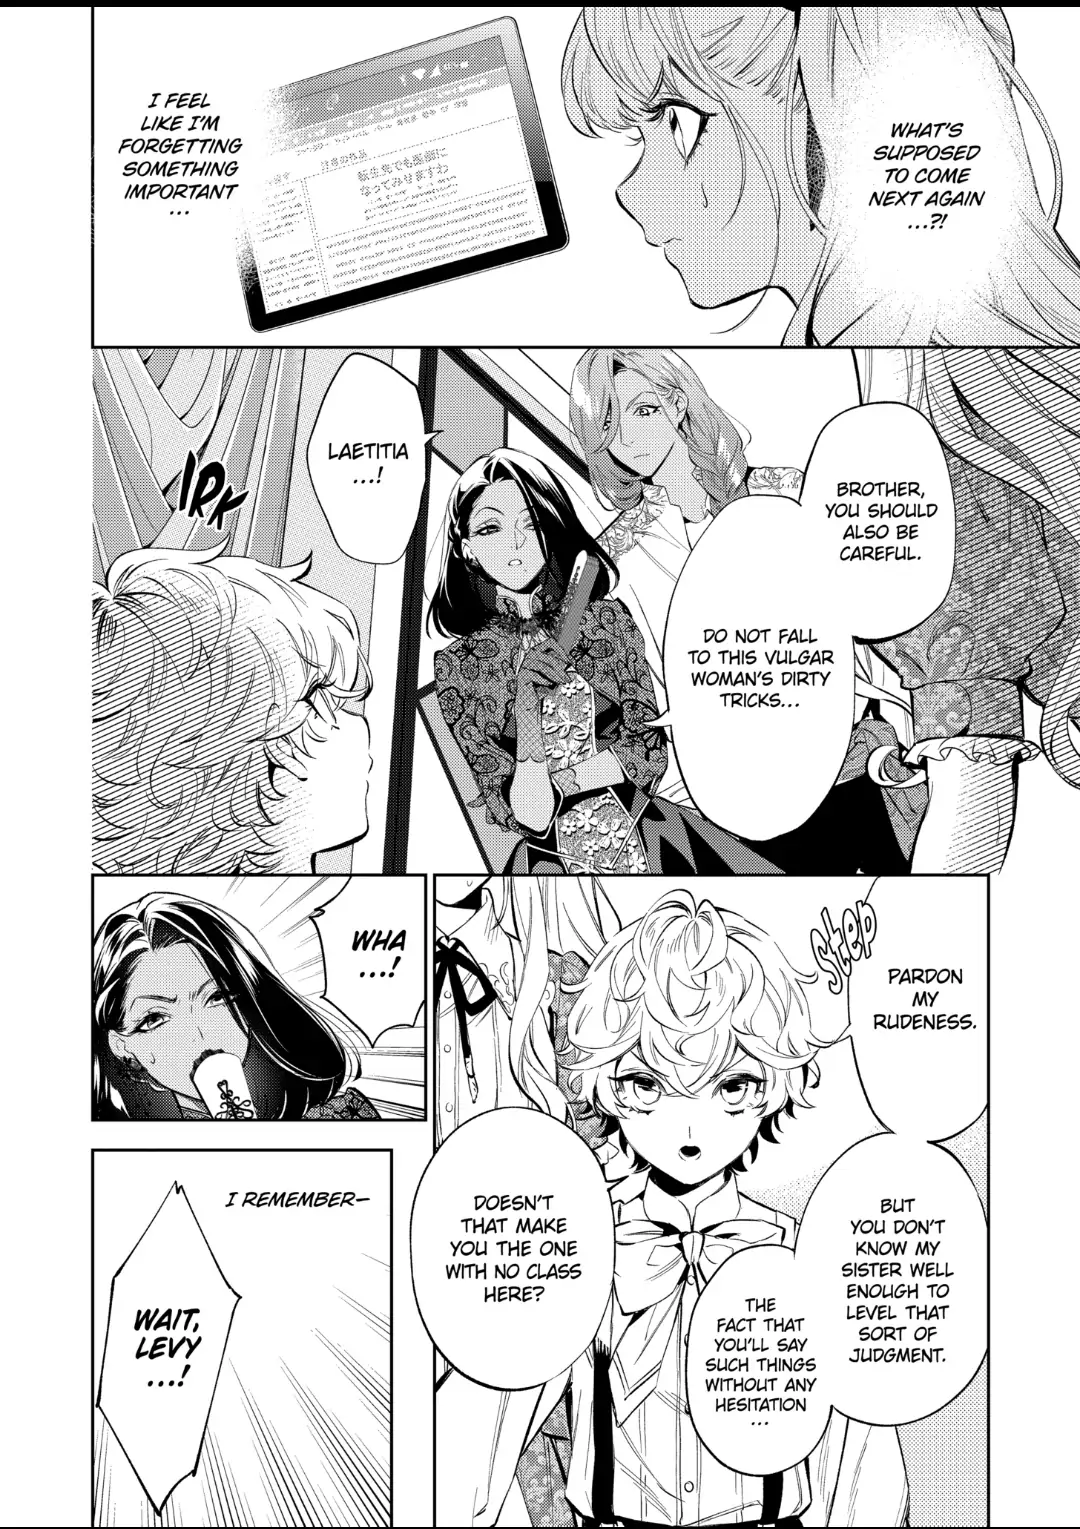 Villain Lady Wishes to Be Like Nightingale - chapter 20.1 - #2